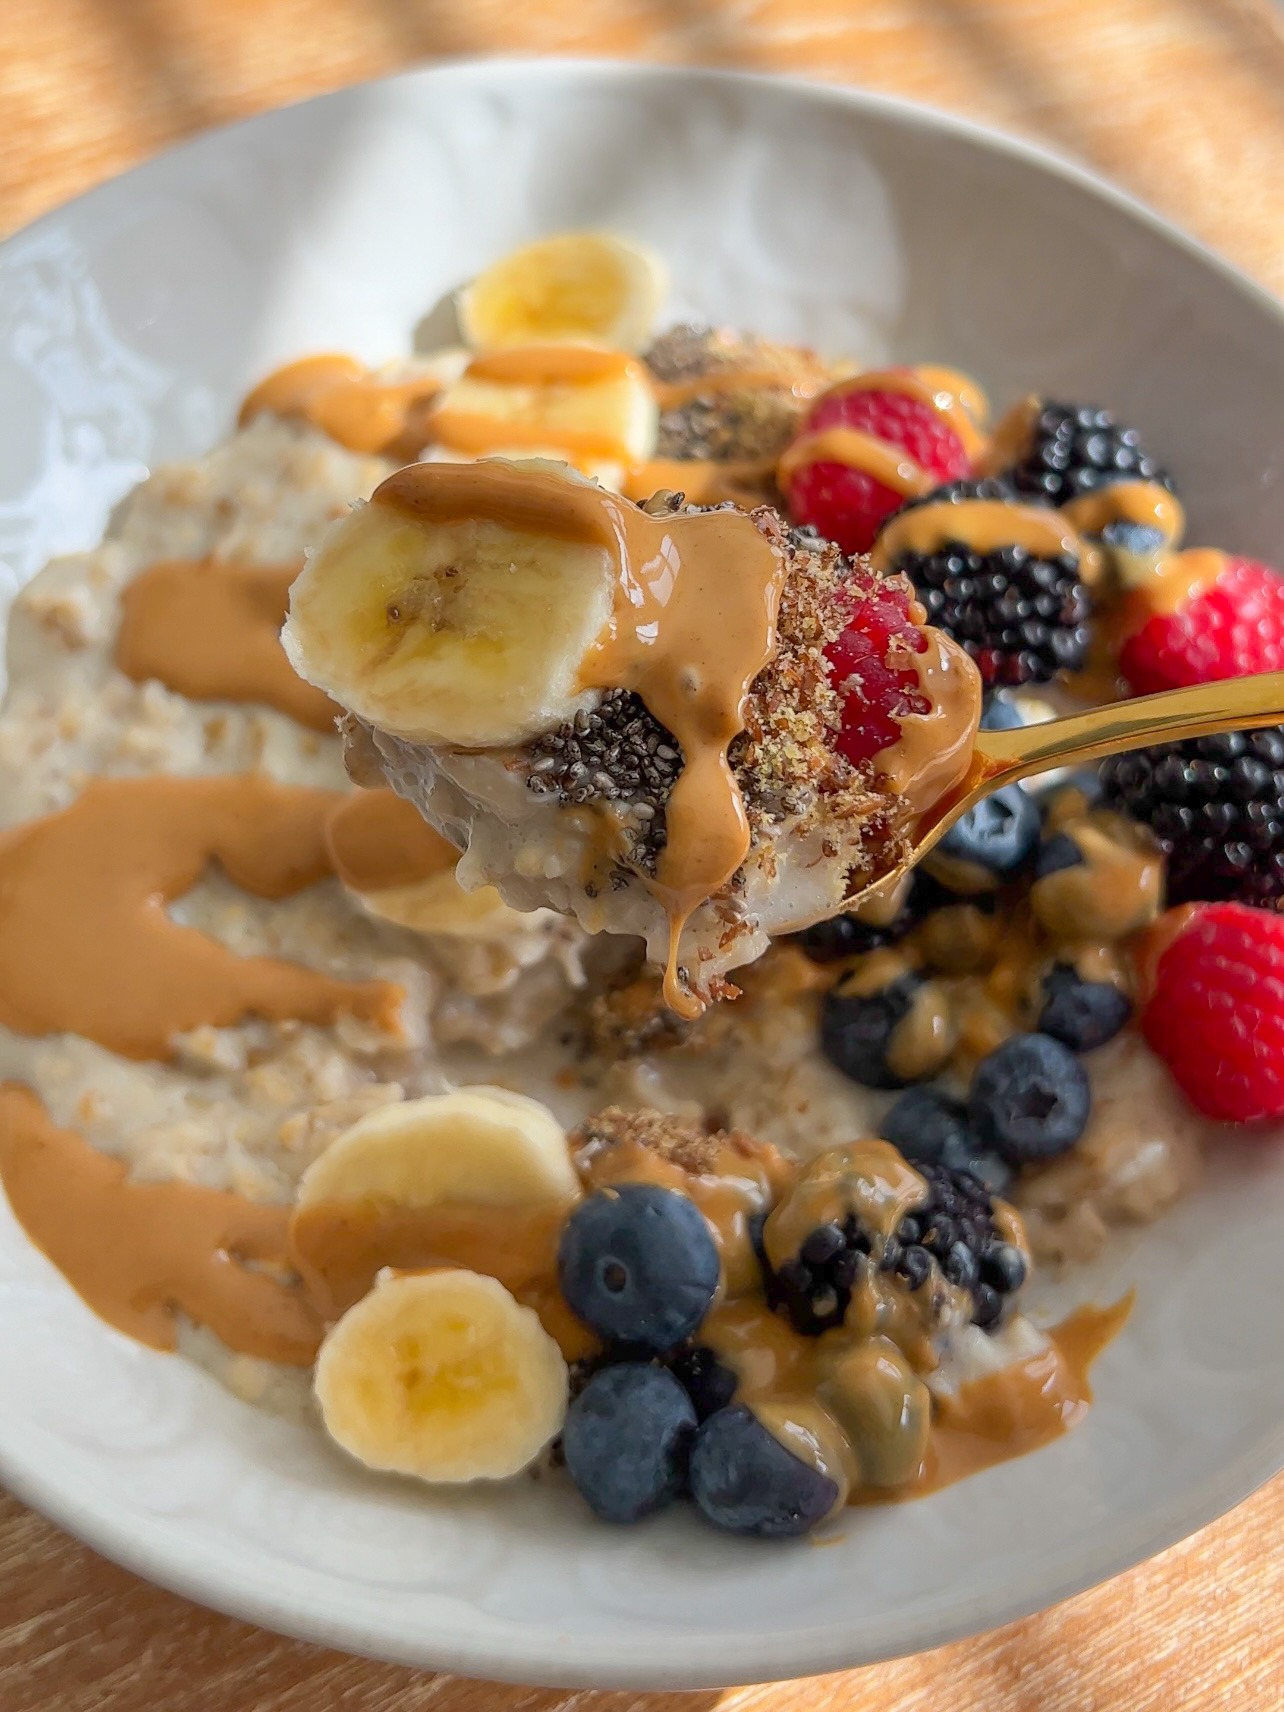 Adding protein to oatmeal can help balance your blood sugar and keep you feeling fuller longer. When combined with healthy fats and fiber from the nut butters, seeds, and berries - a regular bowl of oats becomes a full and filling meal. And the best part, no added artificial sugars or sweeteners are needed!